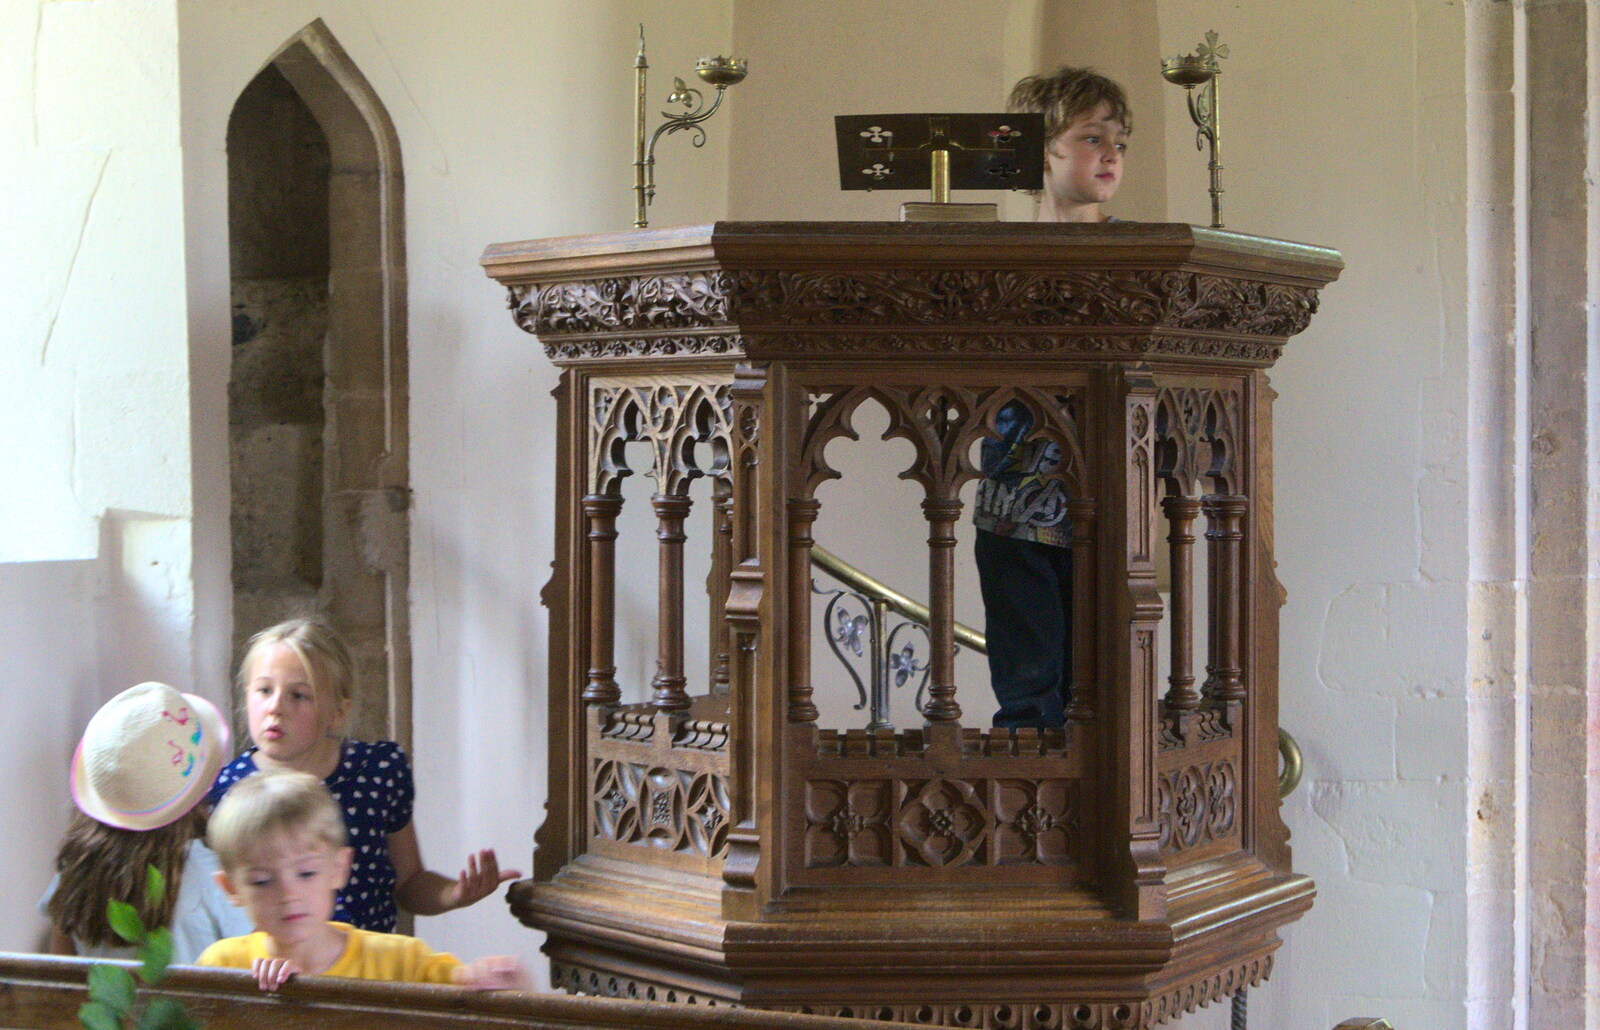 Fred's in the pulpit from Camping at Dower House, West Harling, Norfolk - 1st July 2017